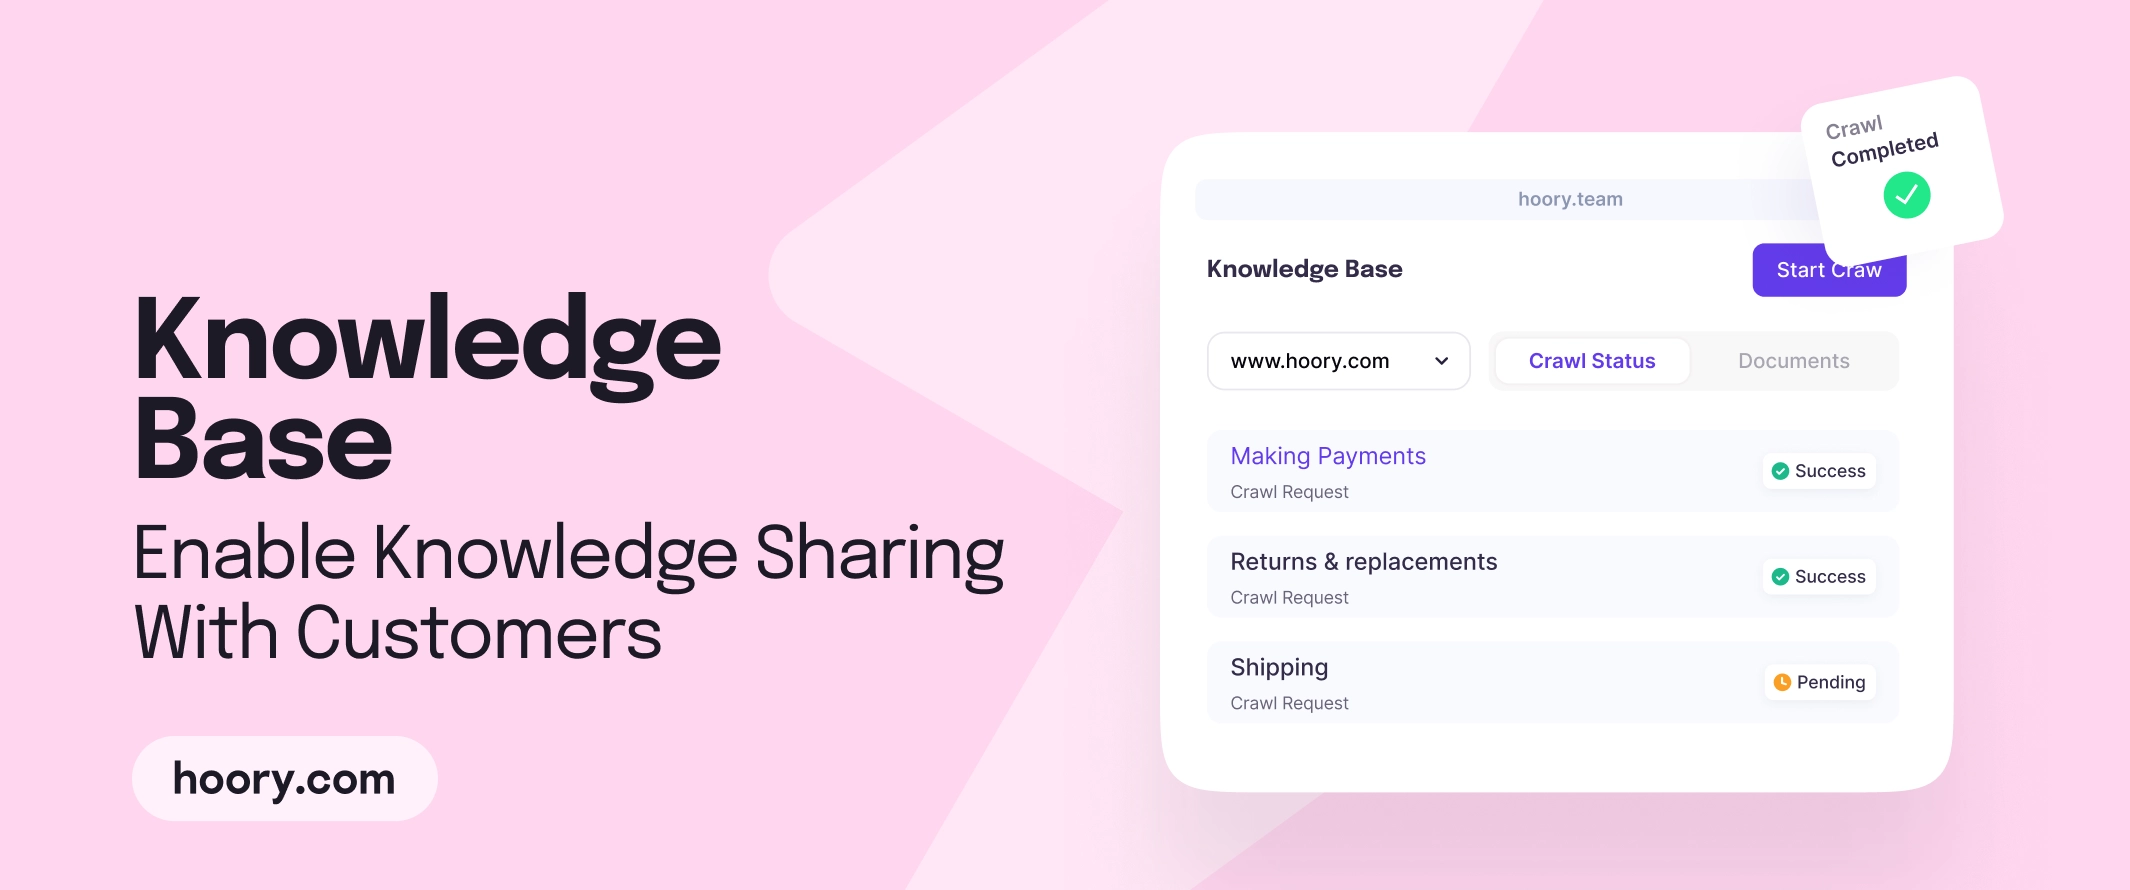 Knowledge Base: Enable Knowledge Sharing With Customers